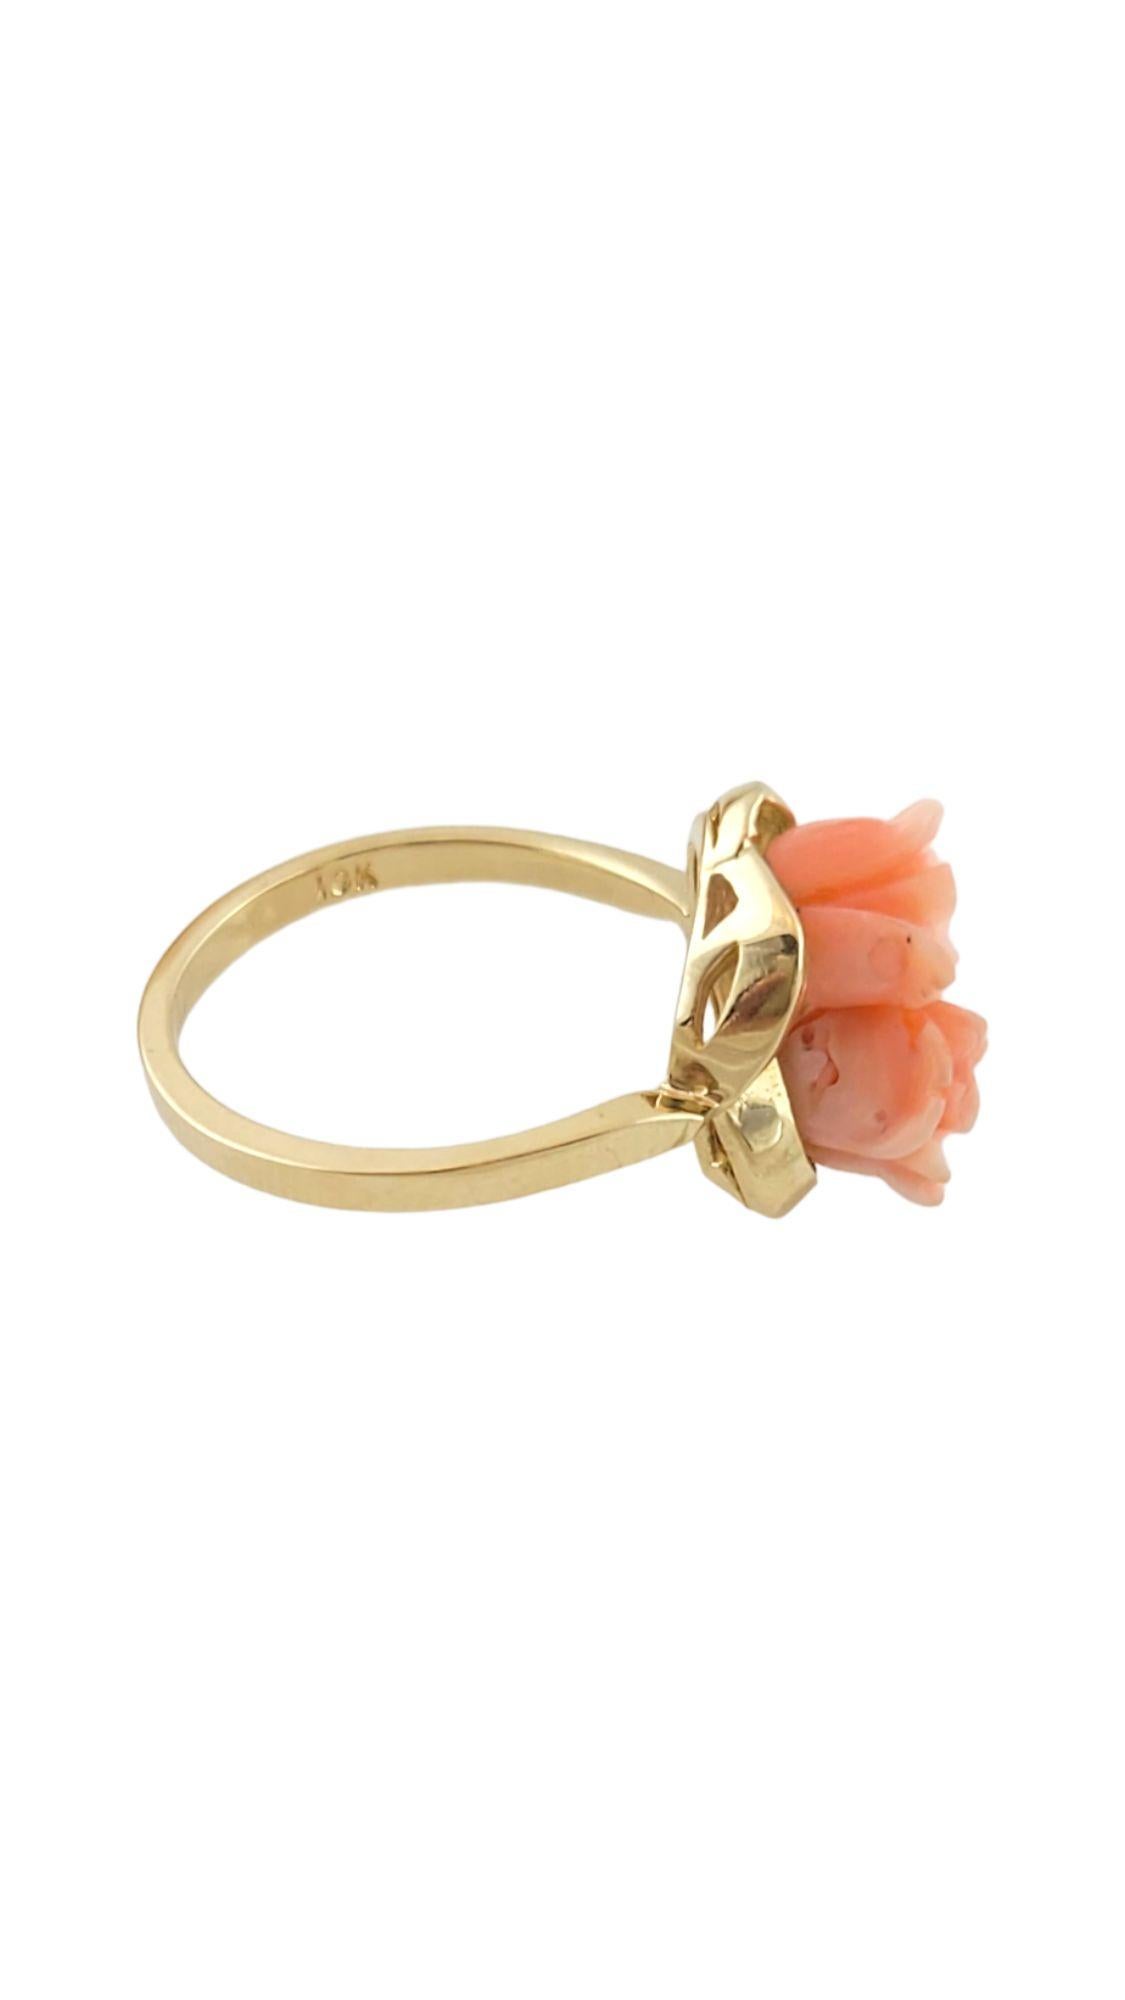 Rose Cut 10K Yellow Gold Coral Rose Ring Size 6.5 #14611 For Sale